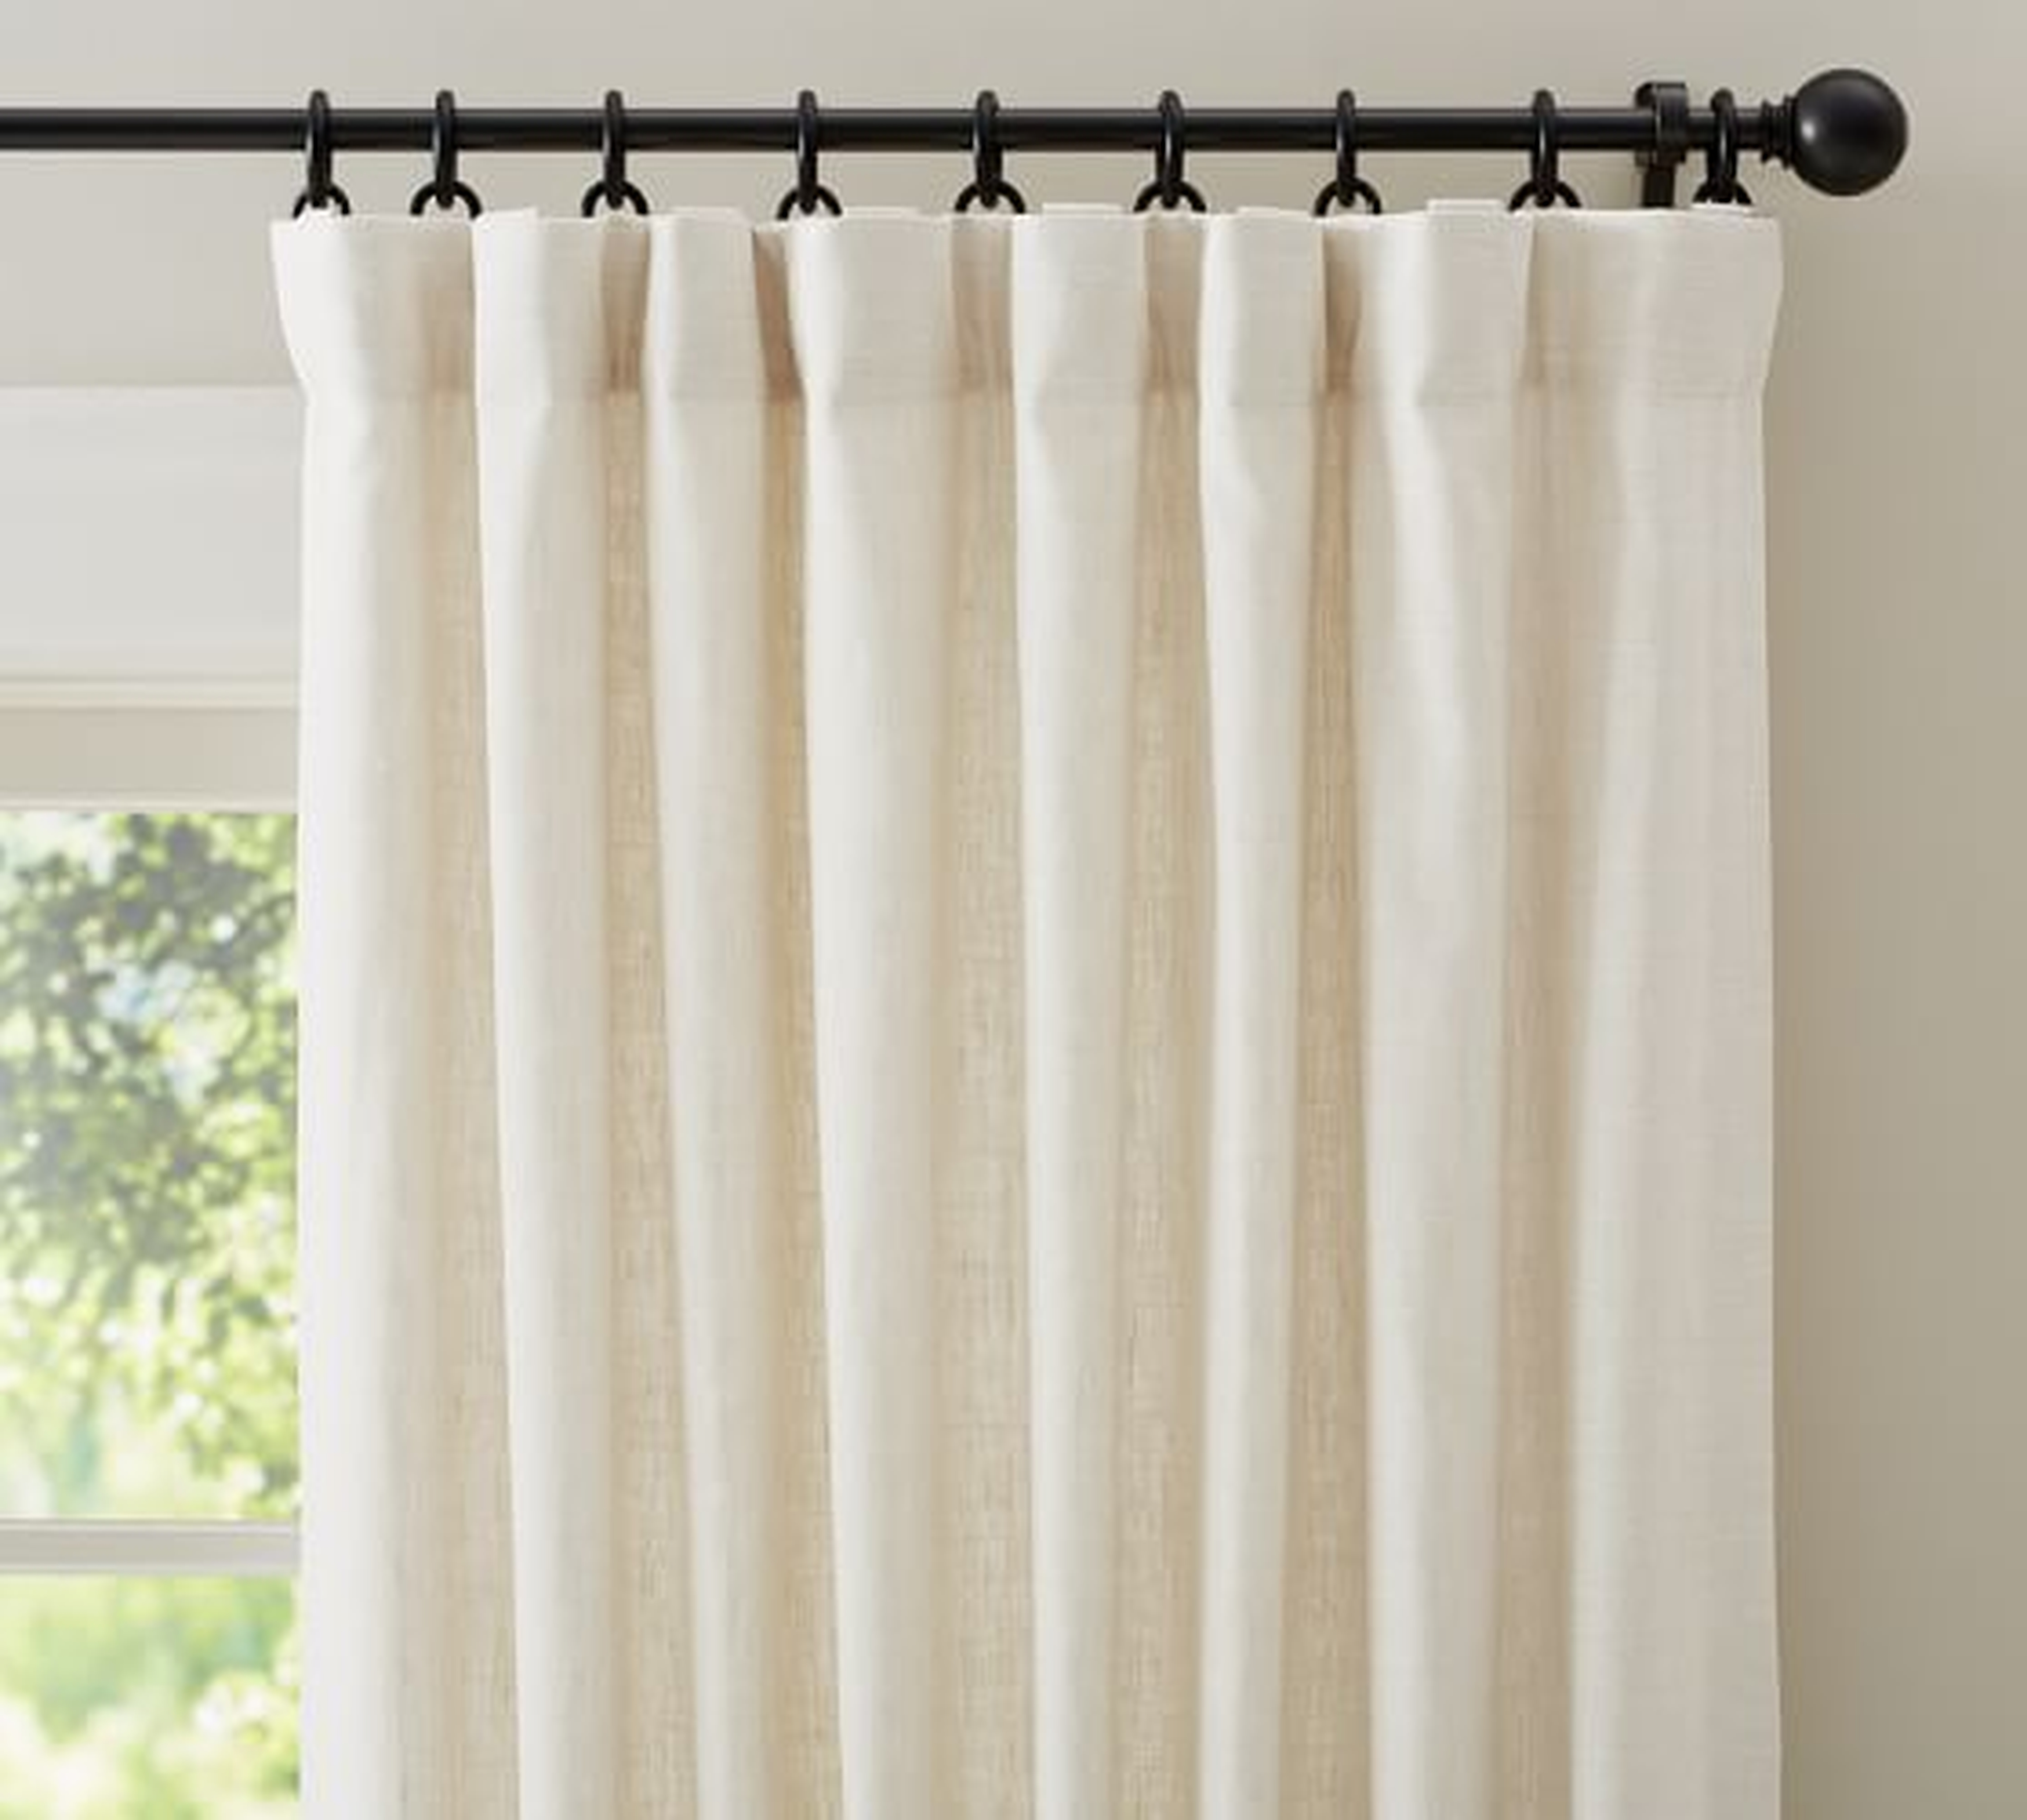 Emery Linen/Cotton Pole-pocket Curtain in Ivory, 100" x 108" - Pottery Barn